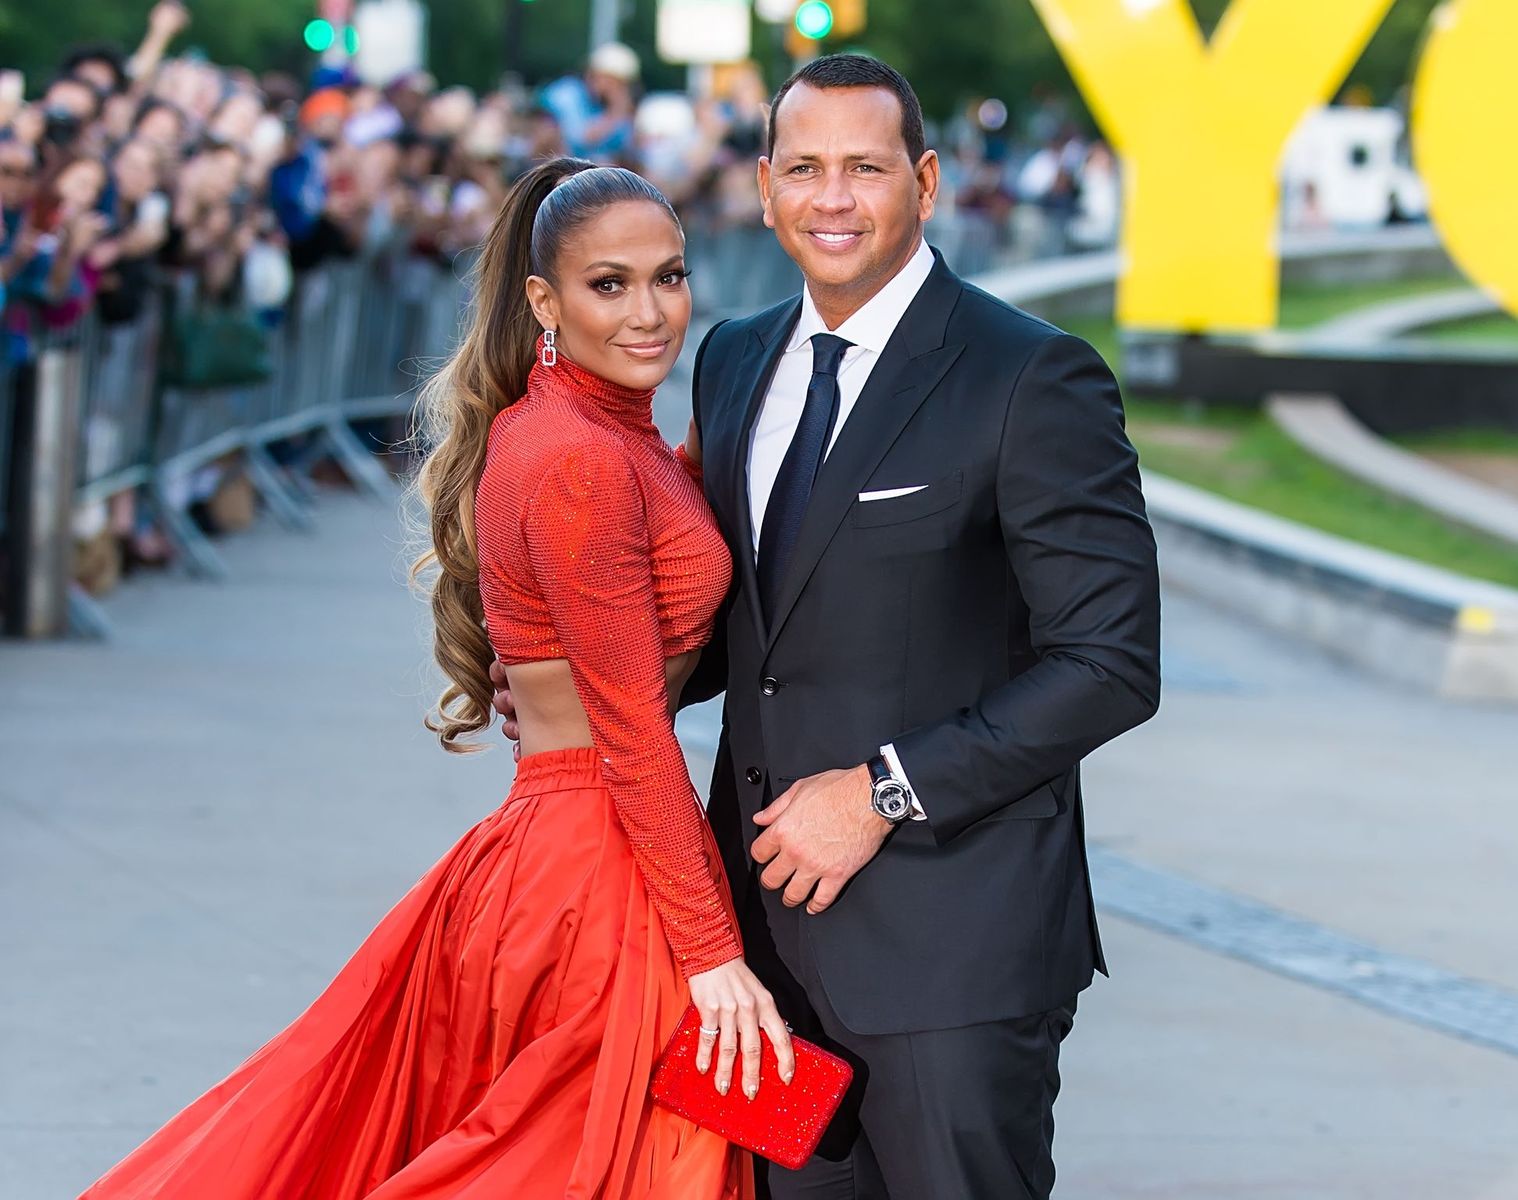 Jennifer Lopez and Alex Rodriguez at the 2019 CFDA Fashion Awards on June 3, 2019 in New York City | Photo: Getty Images